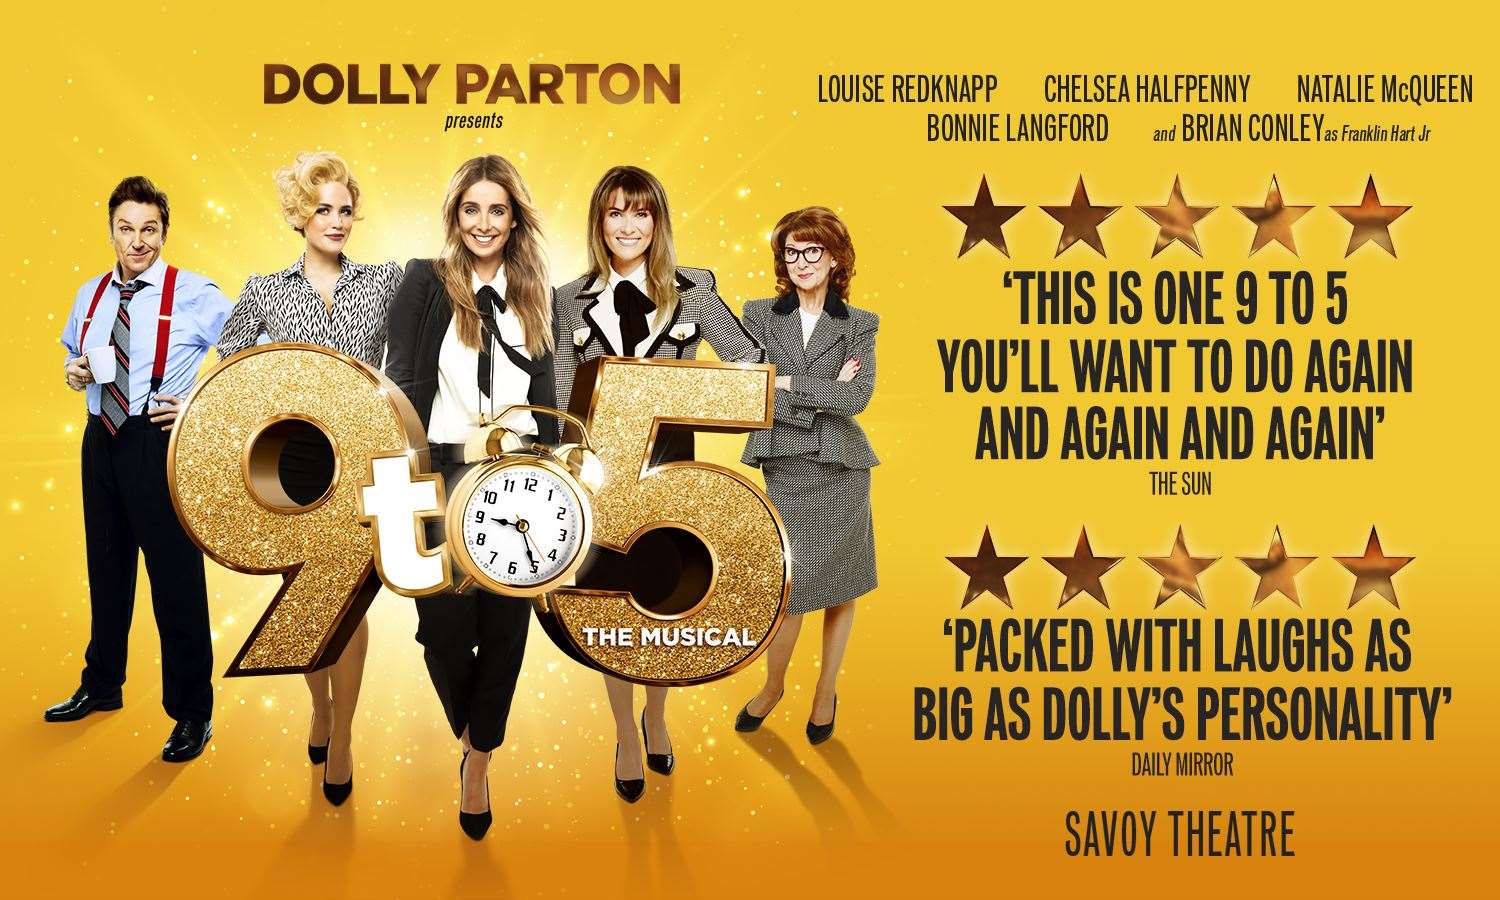 9 To 5 The Musical is getting down to business at the West End's Savoy Theatre for even longer – now booking until May with 300,000 new tickets released!